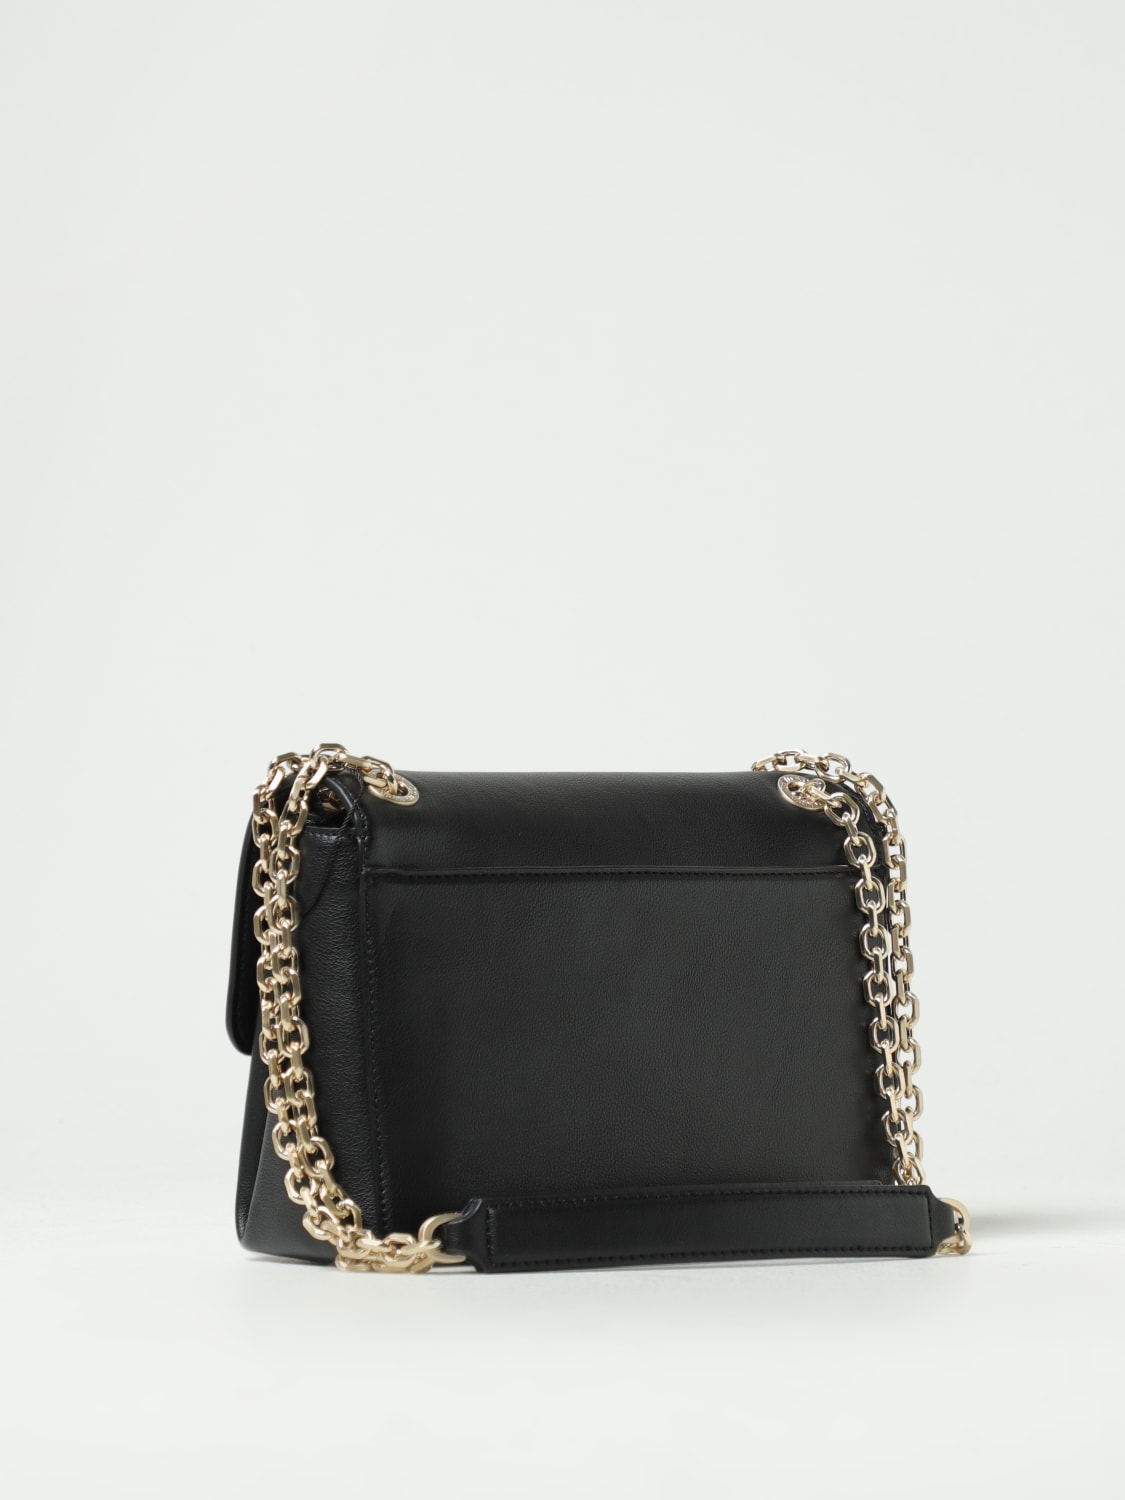 Calvin Klein small shoulder bag with chain detail